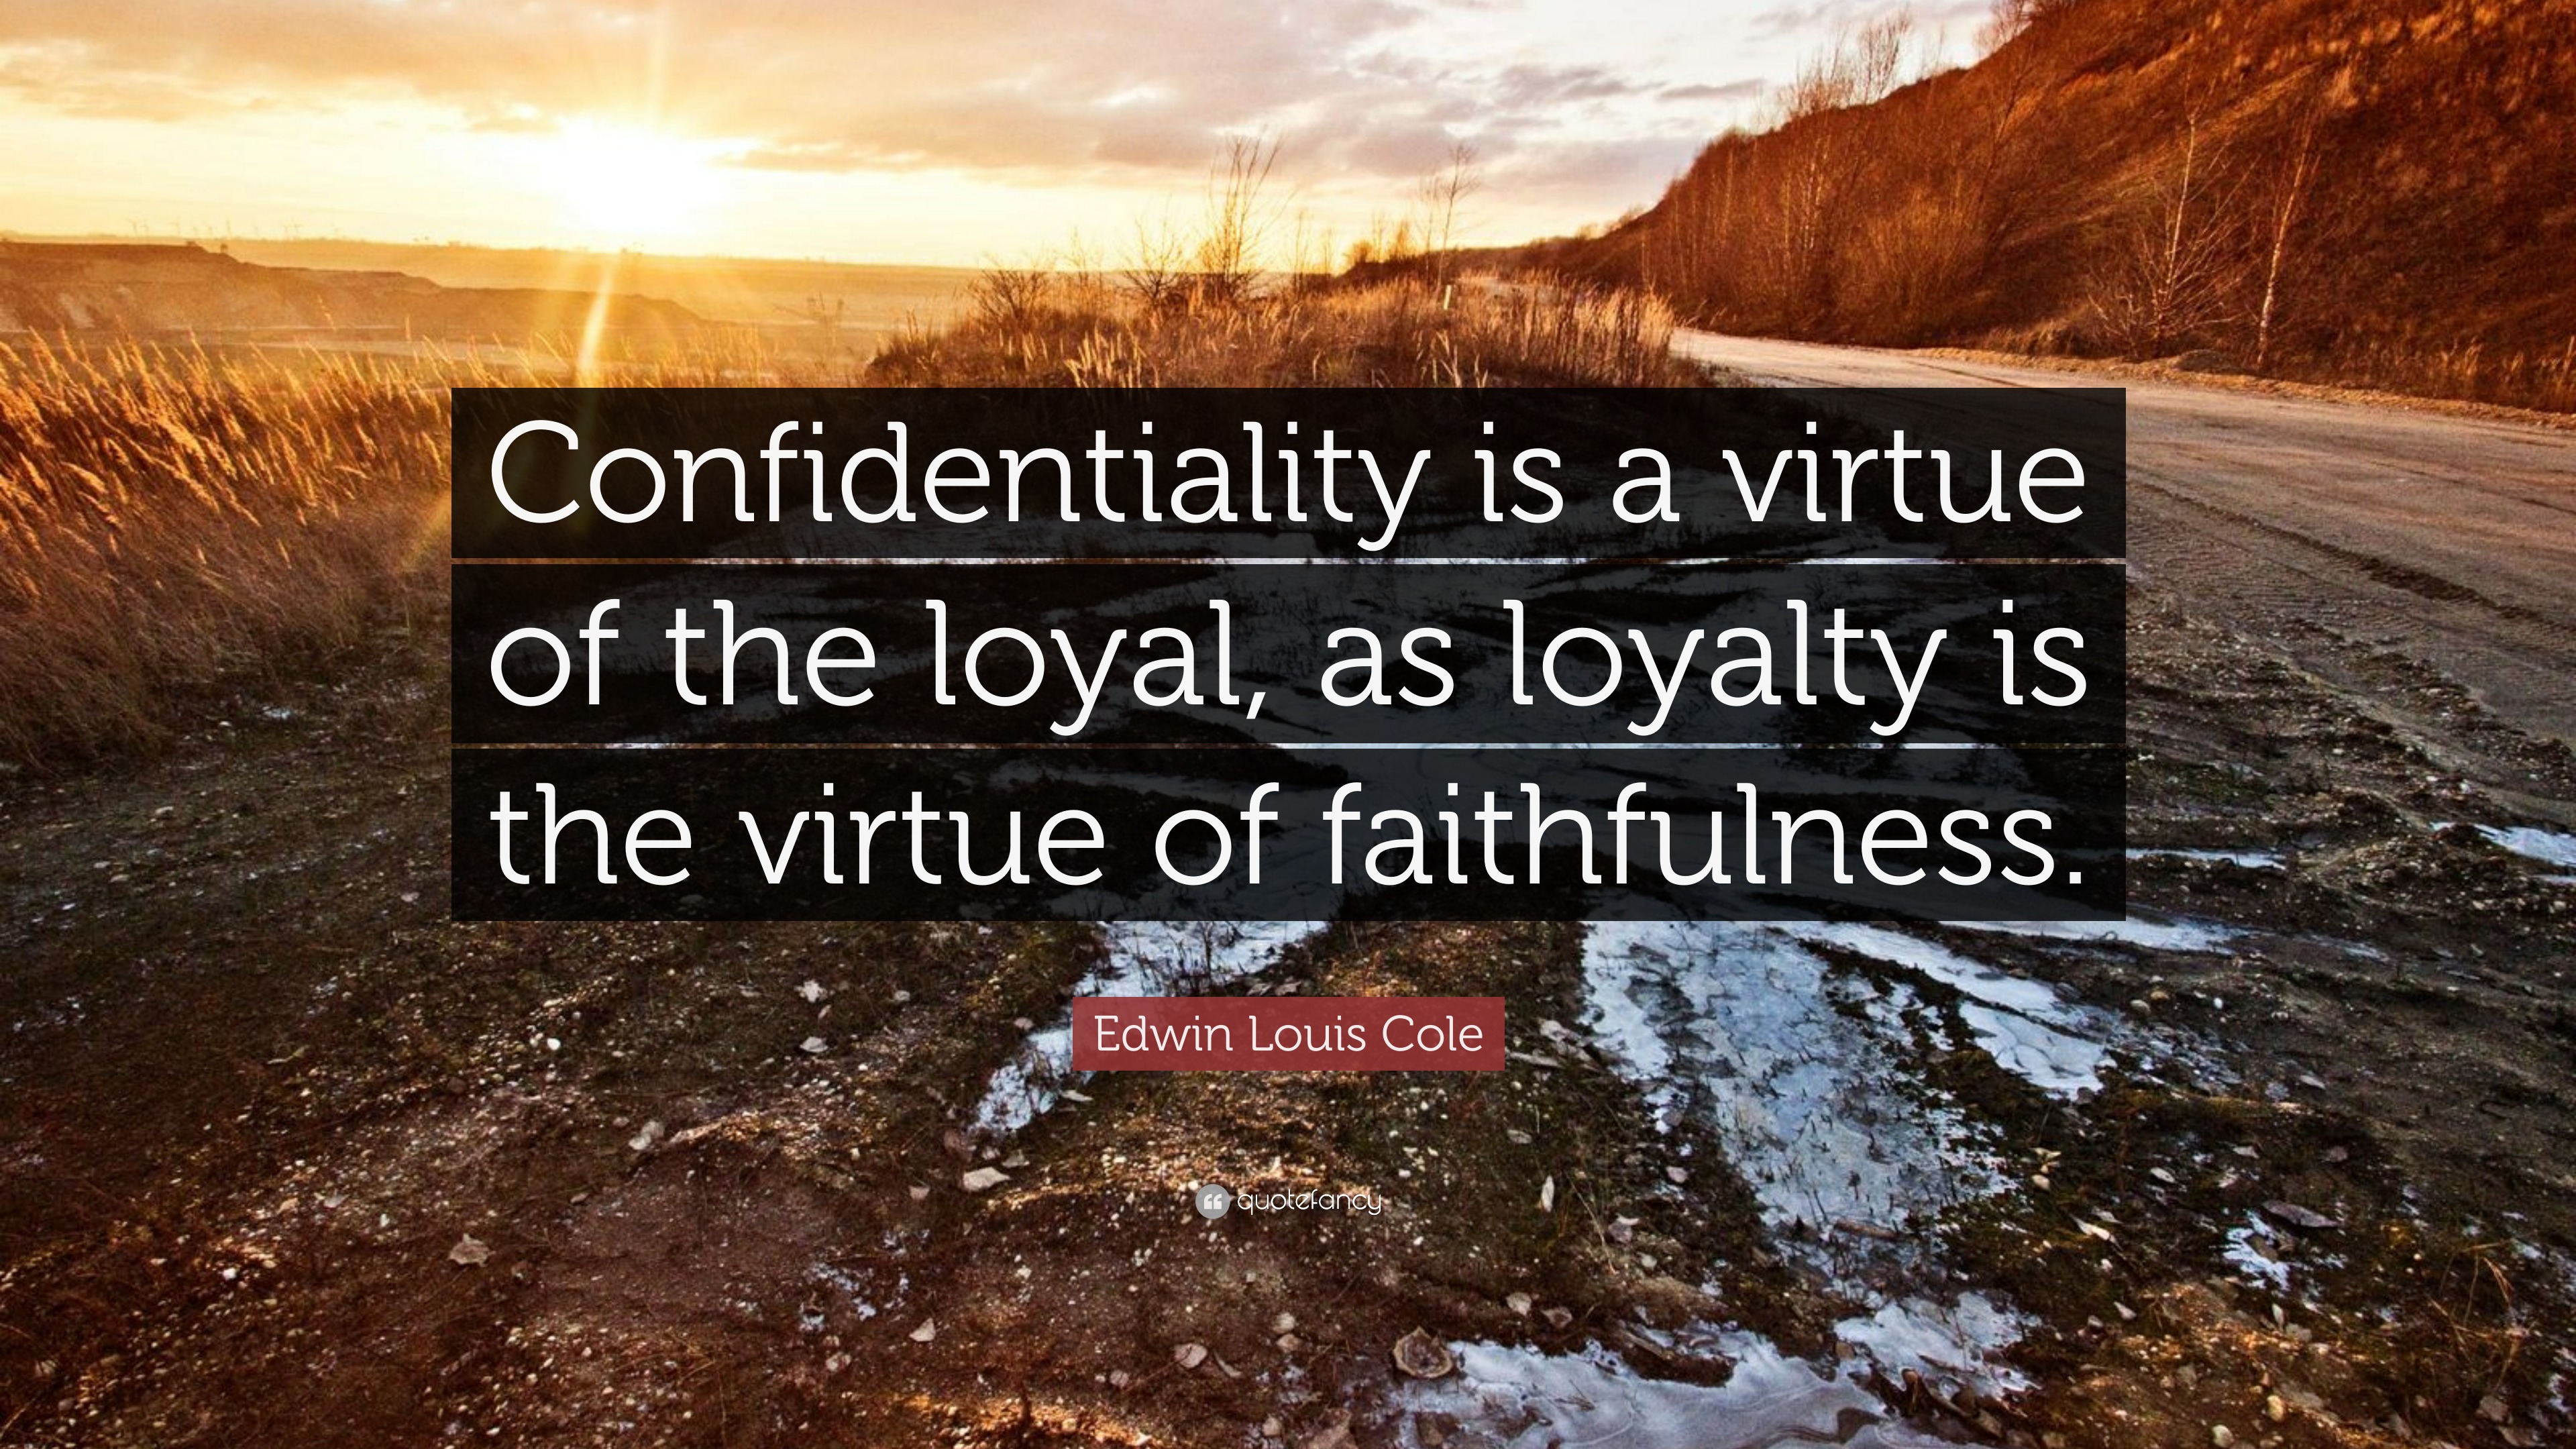 Edwin Louis Cole Quote: “Confidentiality is a virtue of the loyal, as